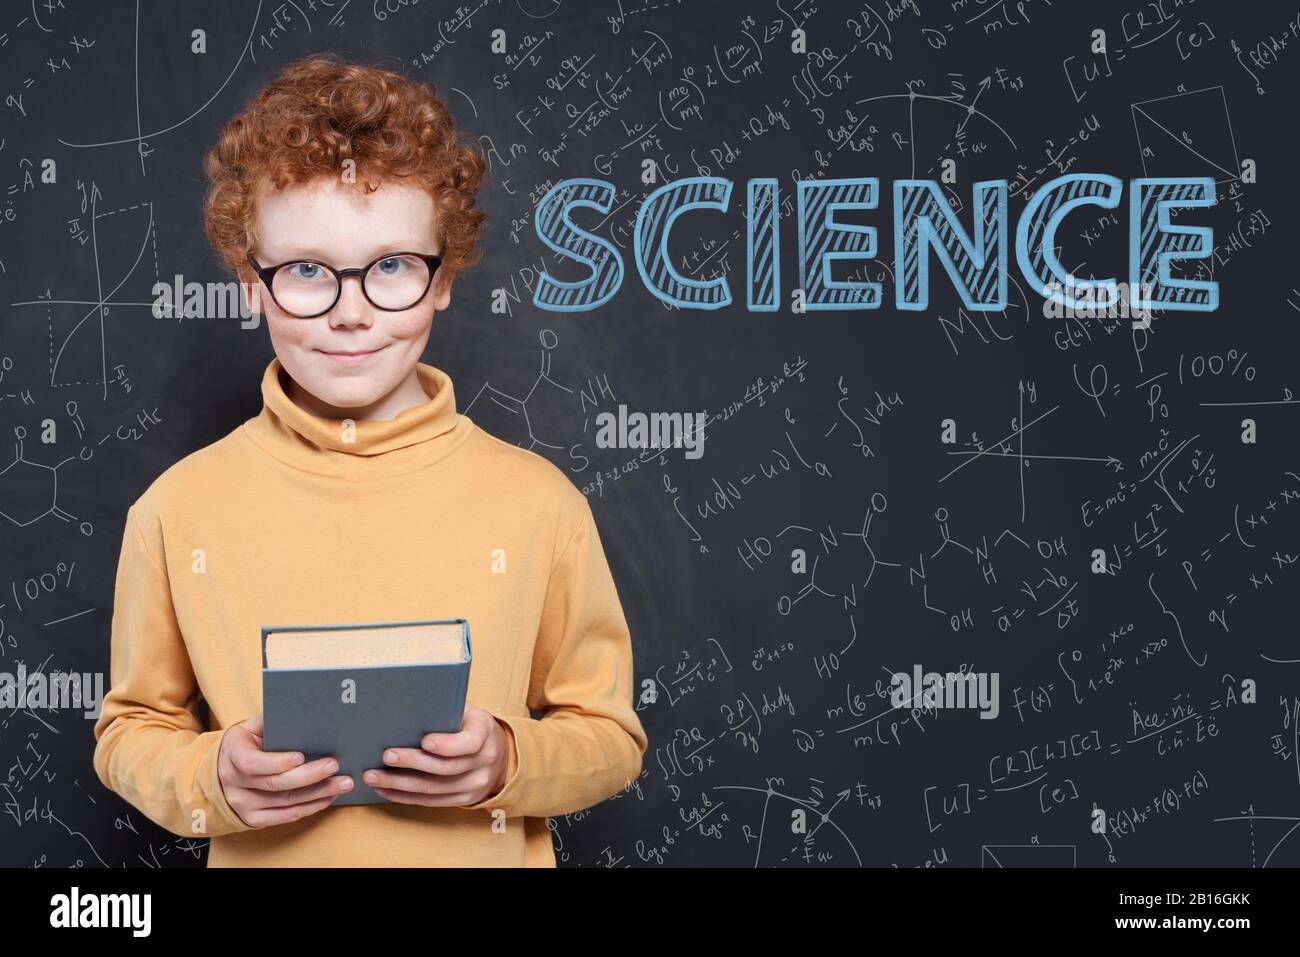 Child learning science. Happy kid boy Stock Photo